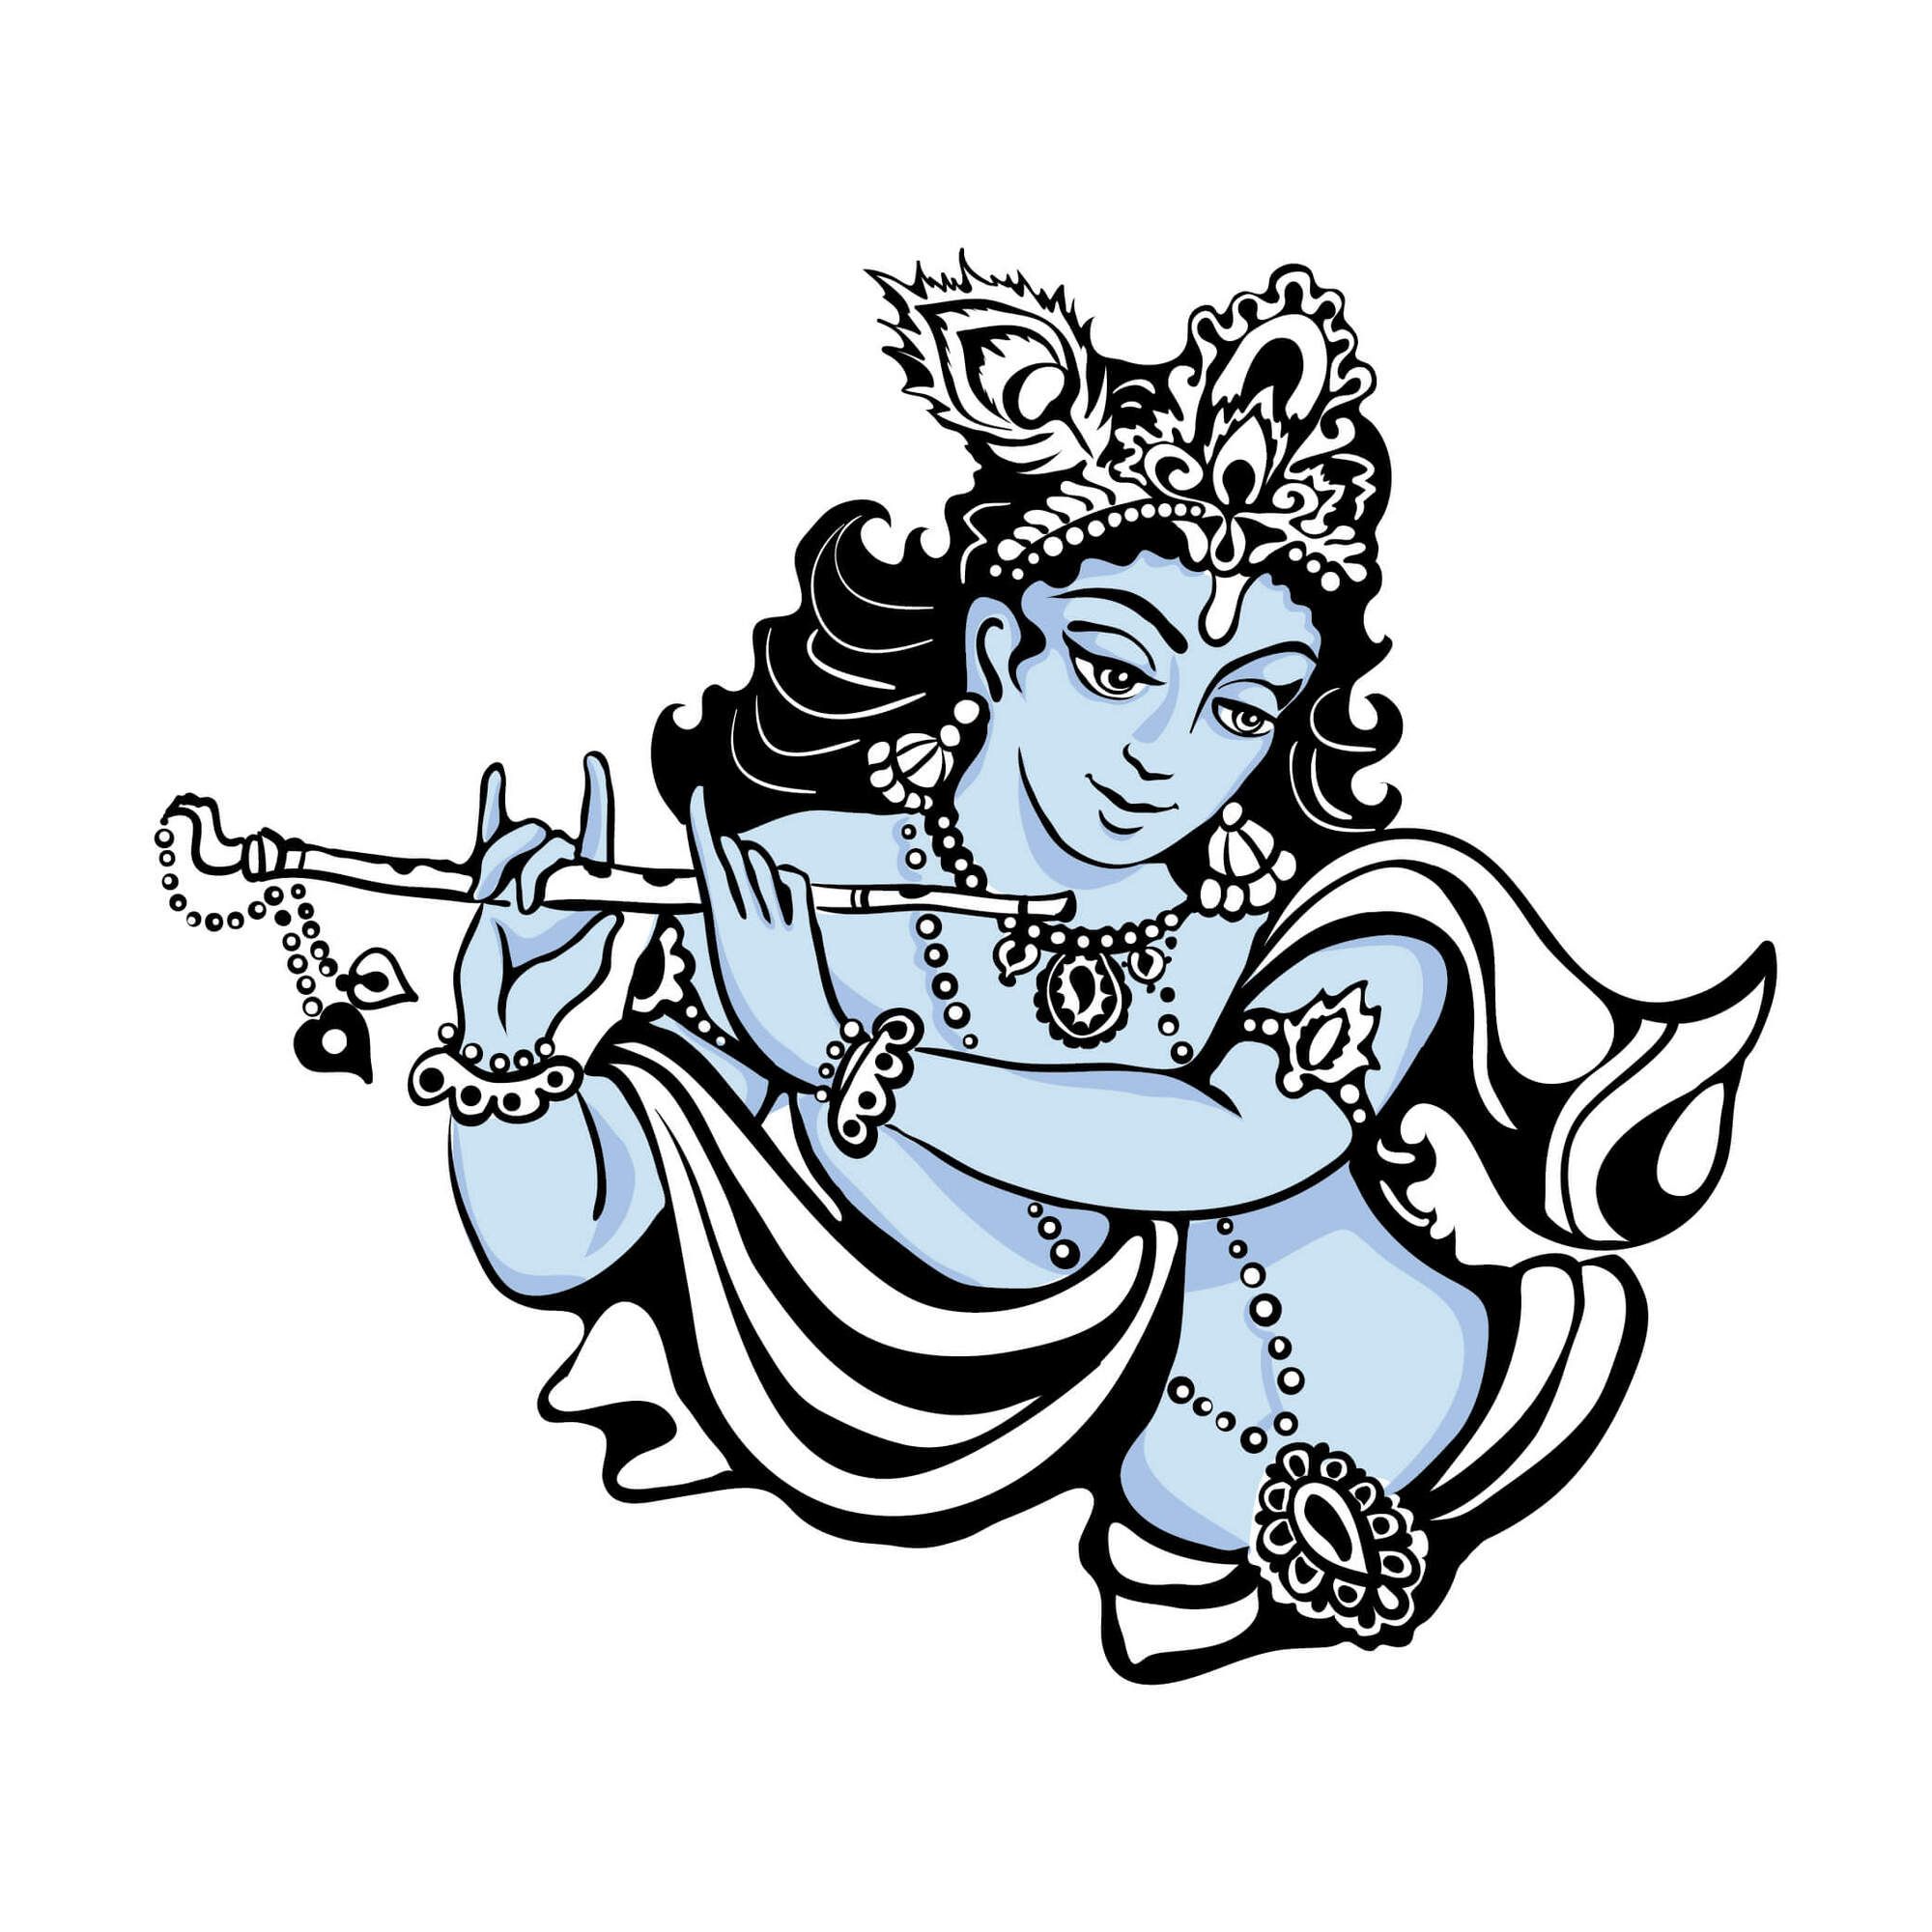 Lord Krishna Plays the Flute - Wall Stickers & Decals by Asian Paints